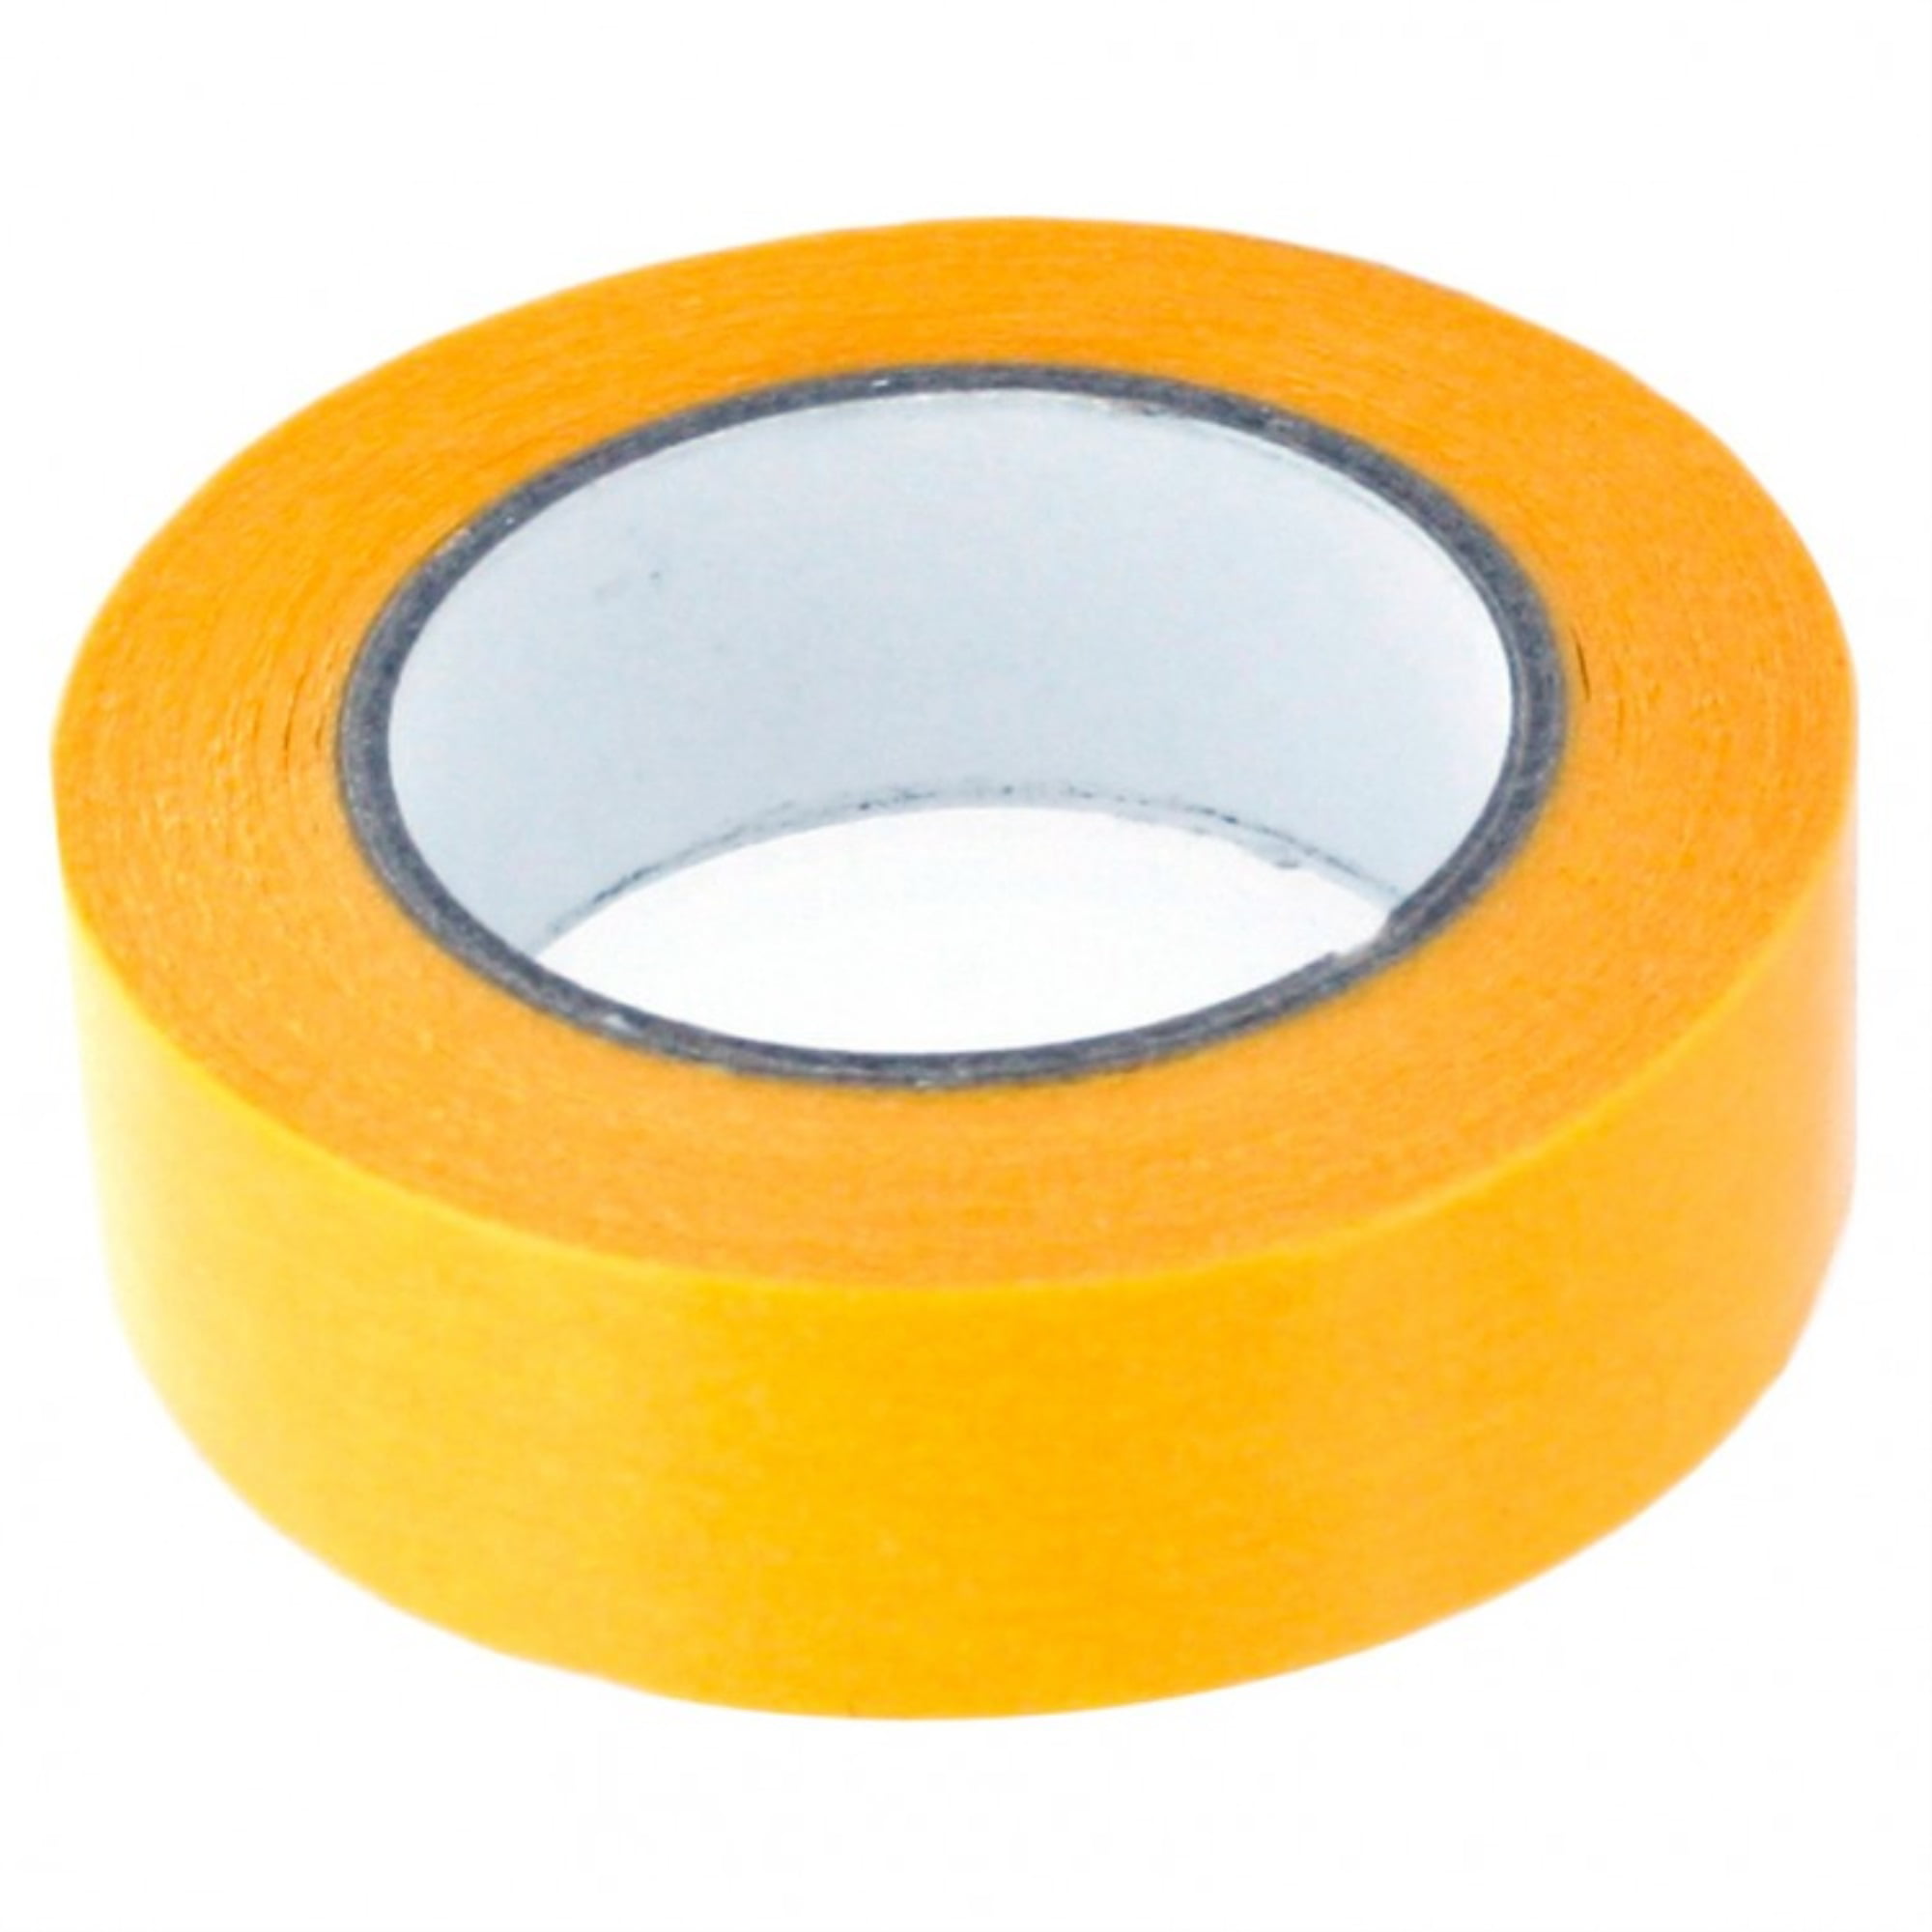 Picture of Acrylicos Vallejo VJP07001 18 mm x 18 m PM Tool Masking tape